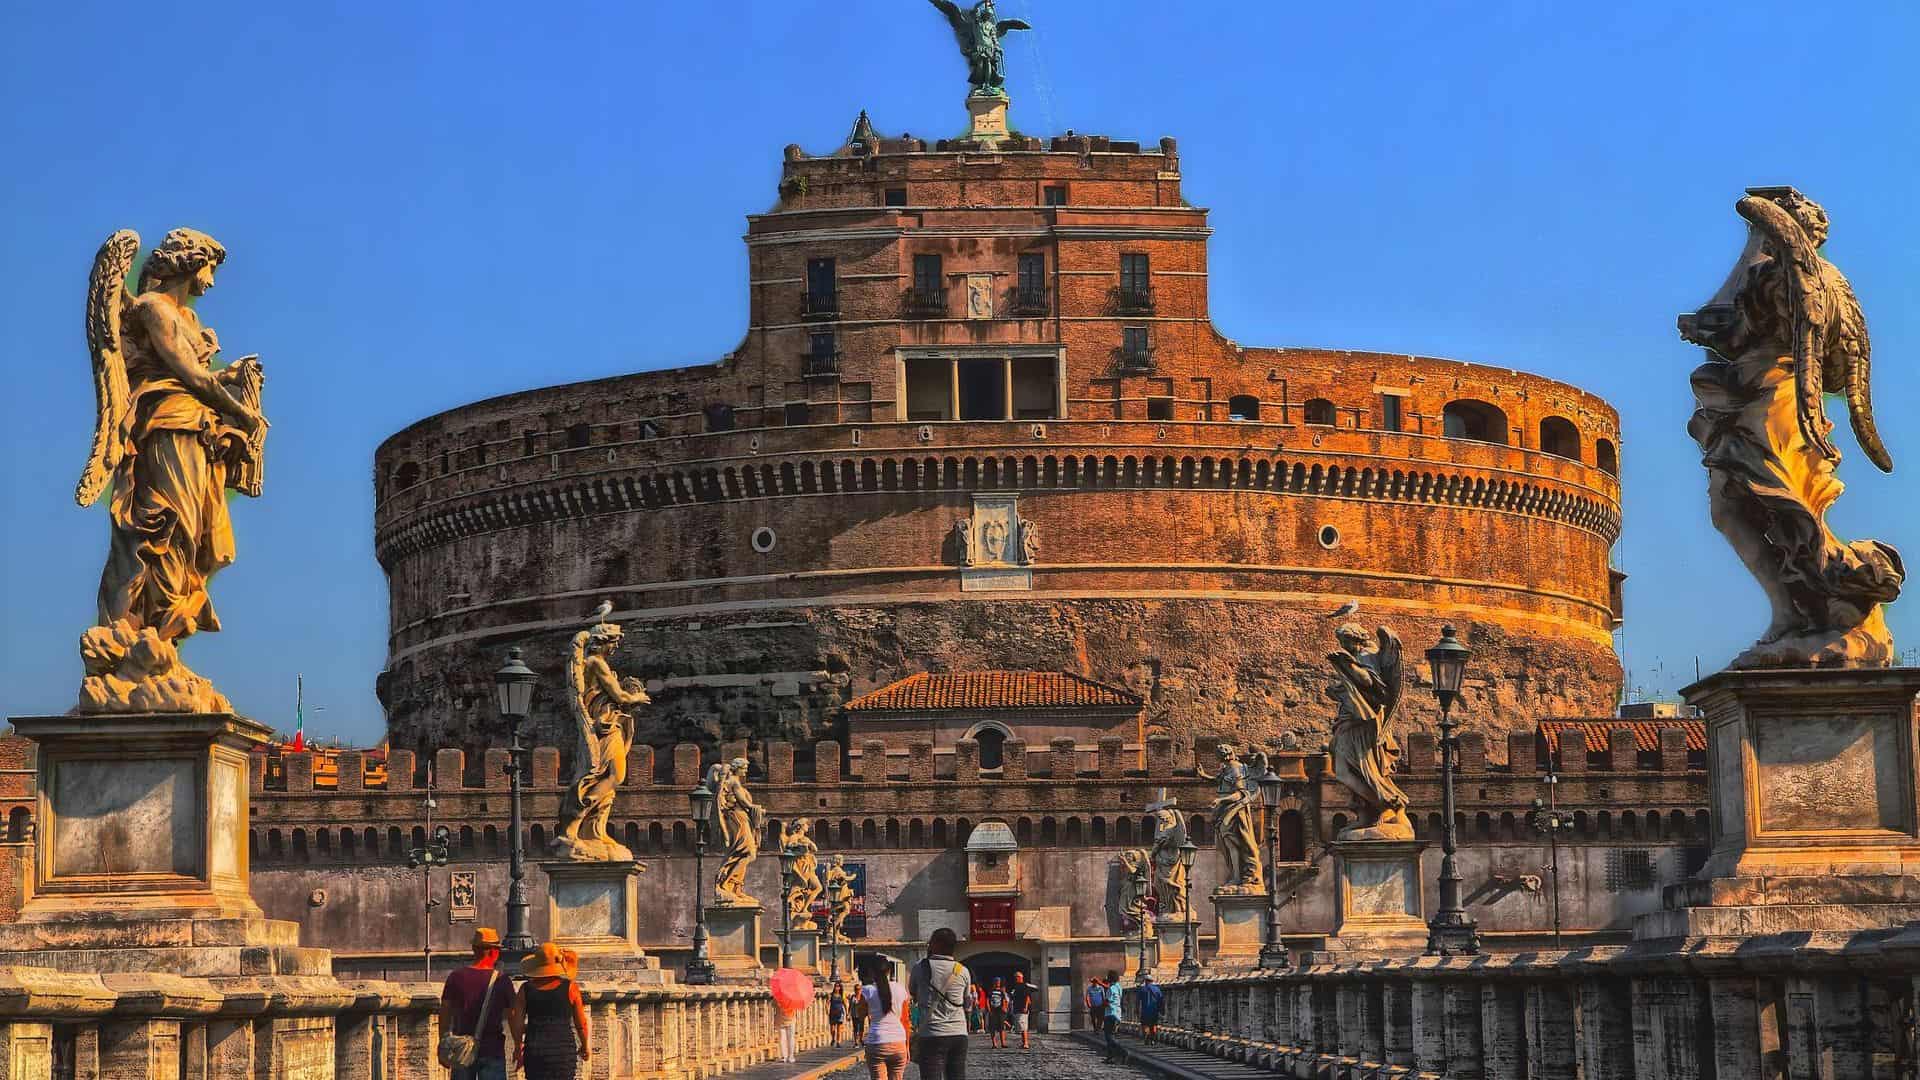 Entrance to Castel Sant’Angelo in Rome